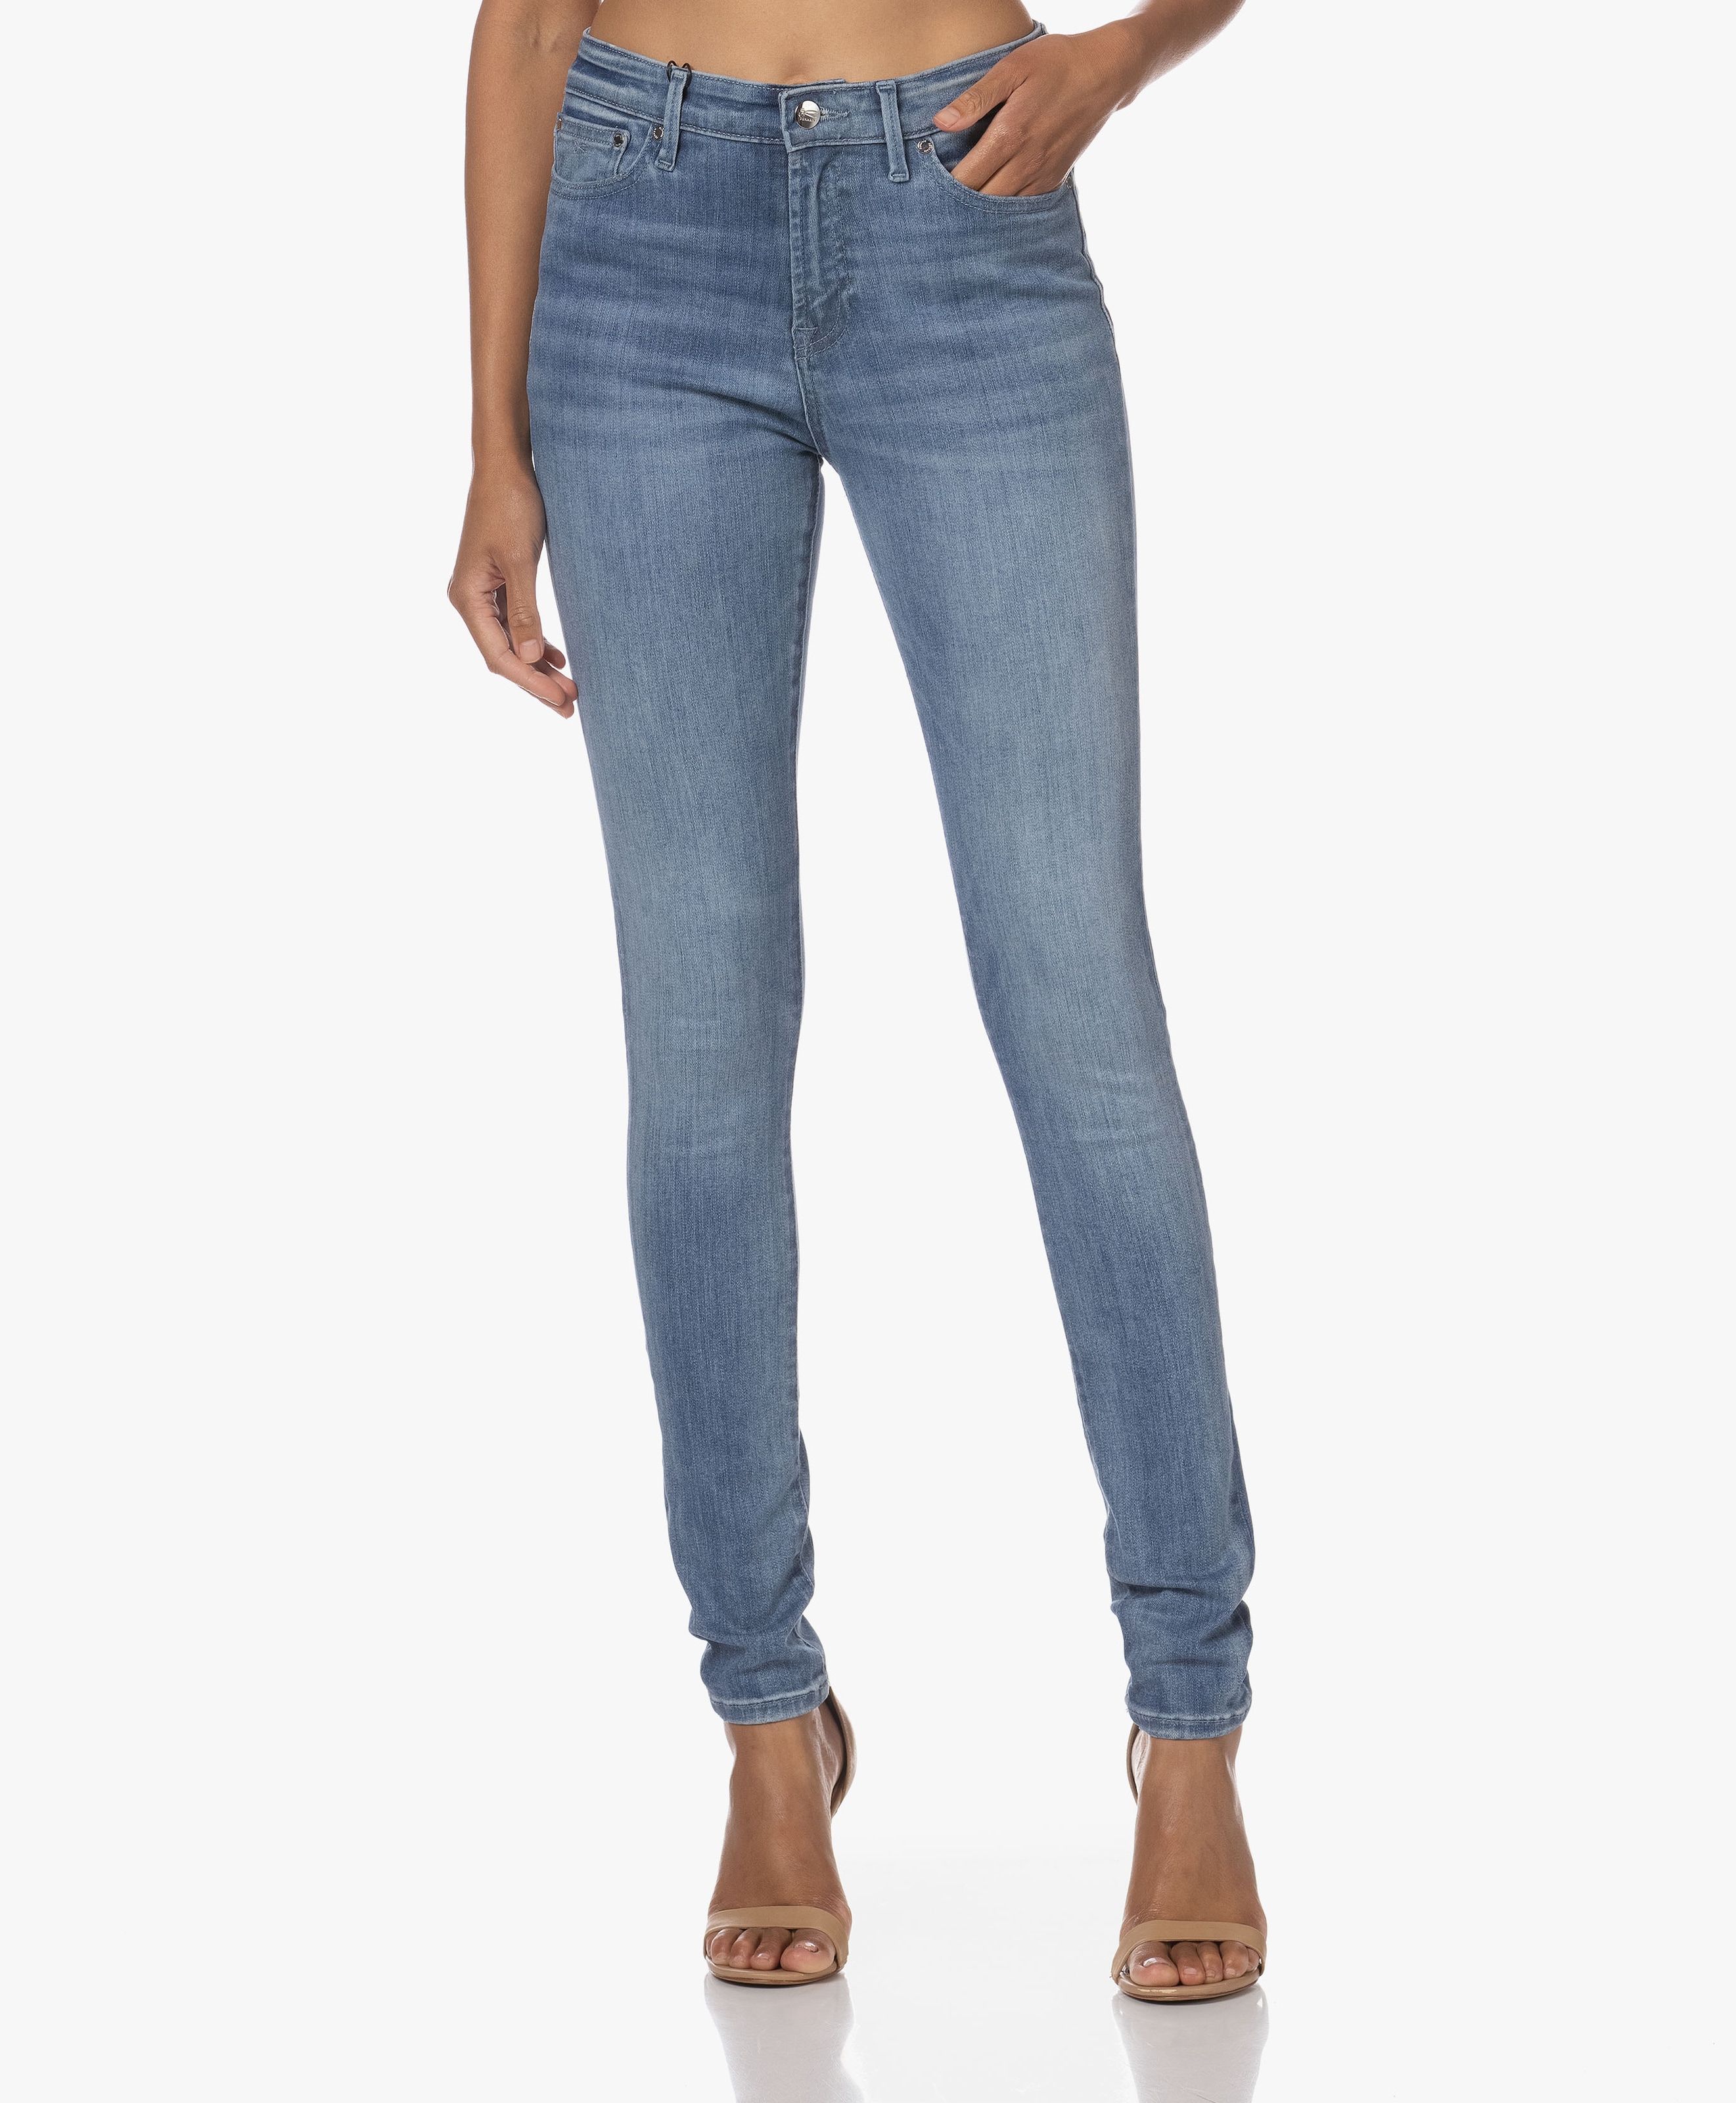 Needle Free Move Stretch Skinny Jeans